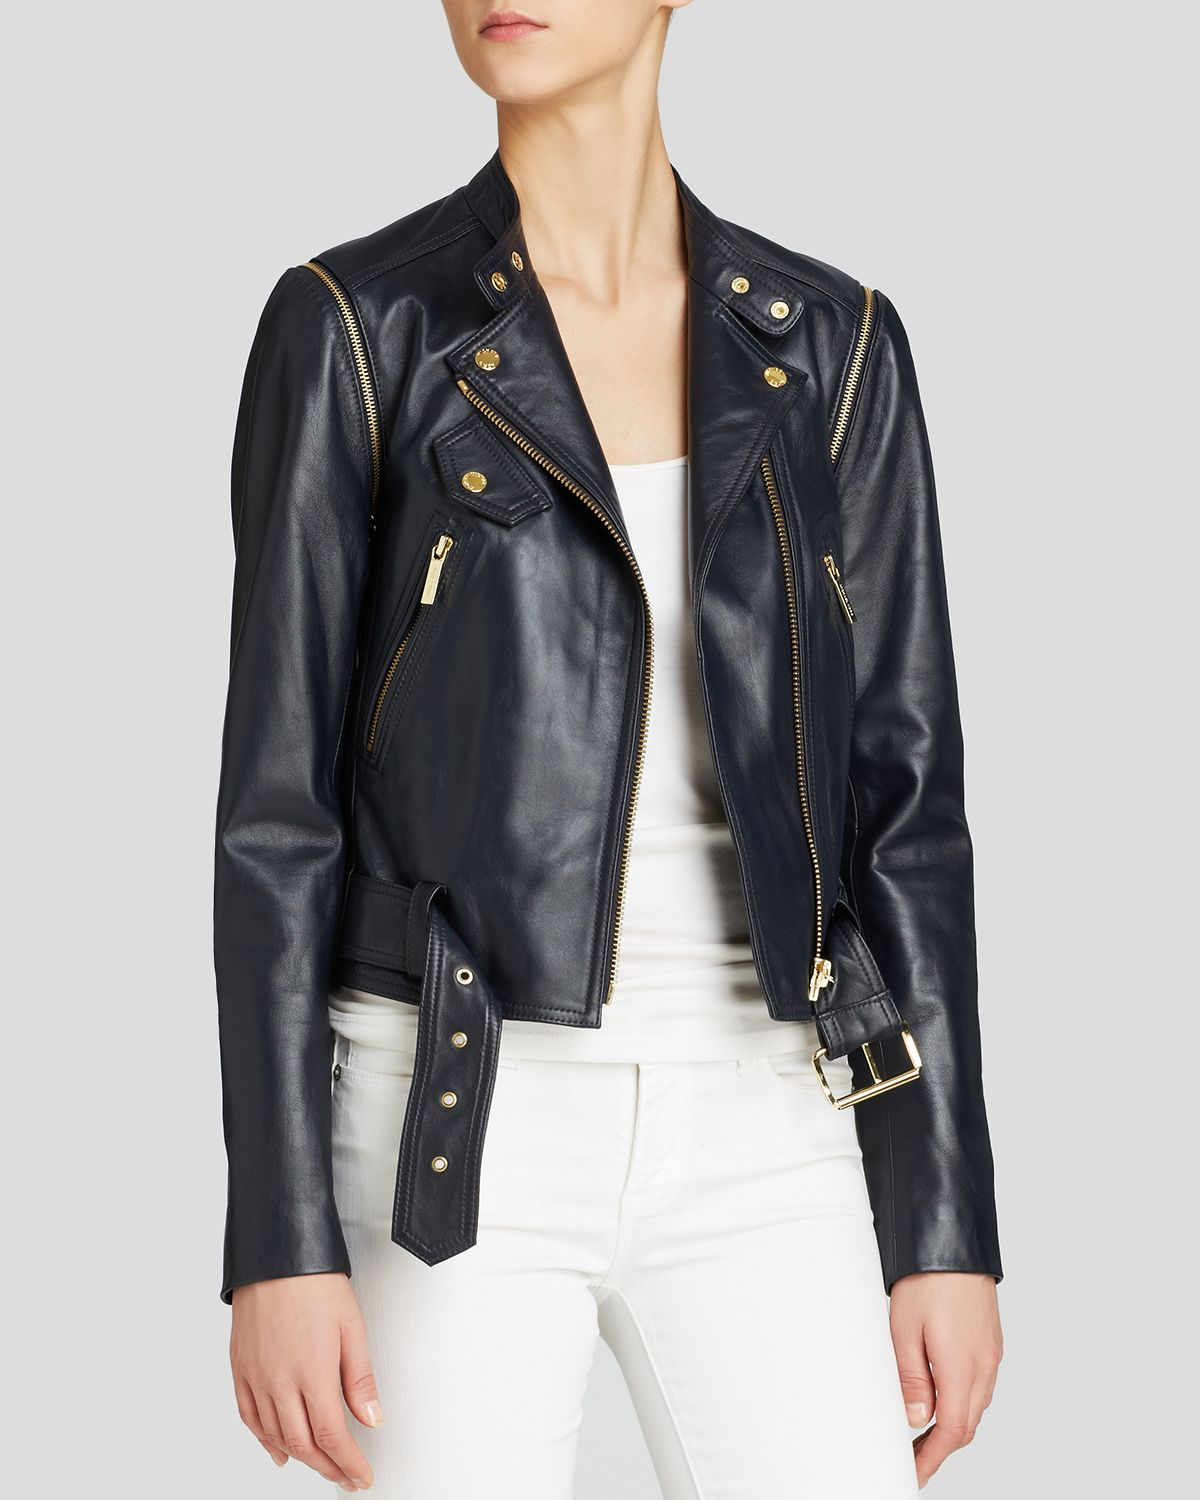 MICHAEL Michael Kors Convertible Leather Moto Jacket in Blue - Lyst